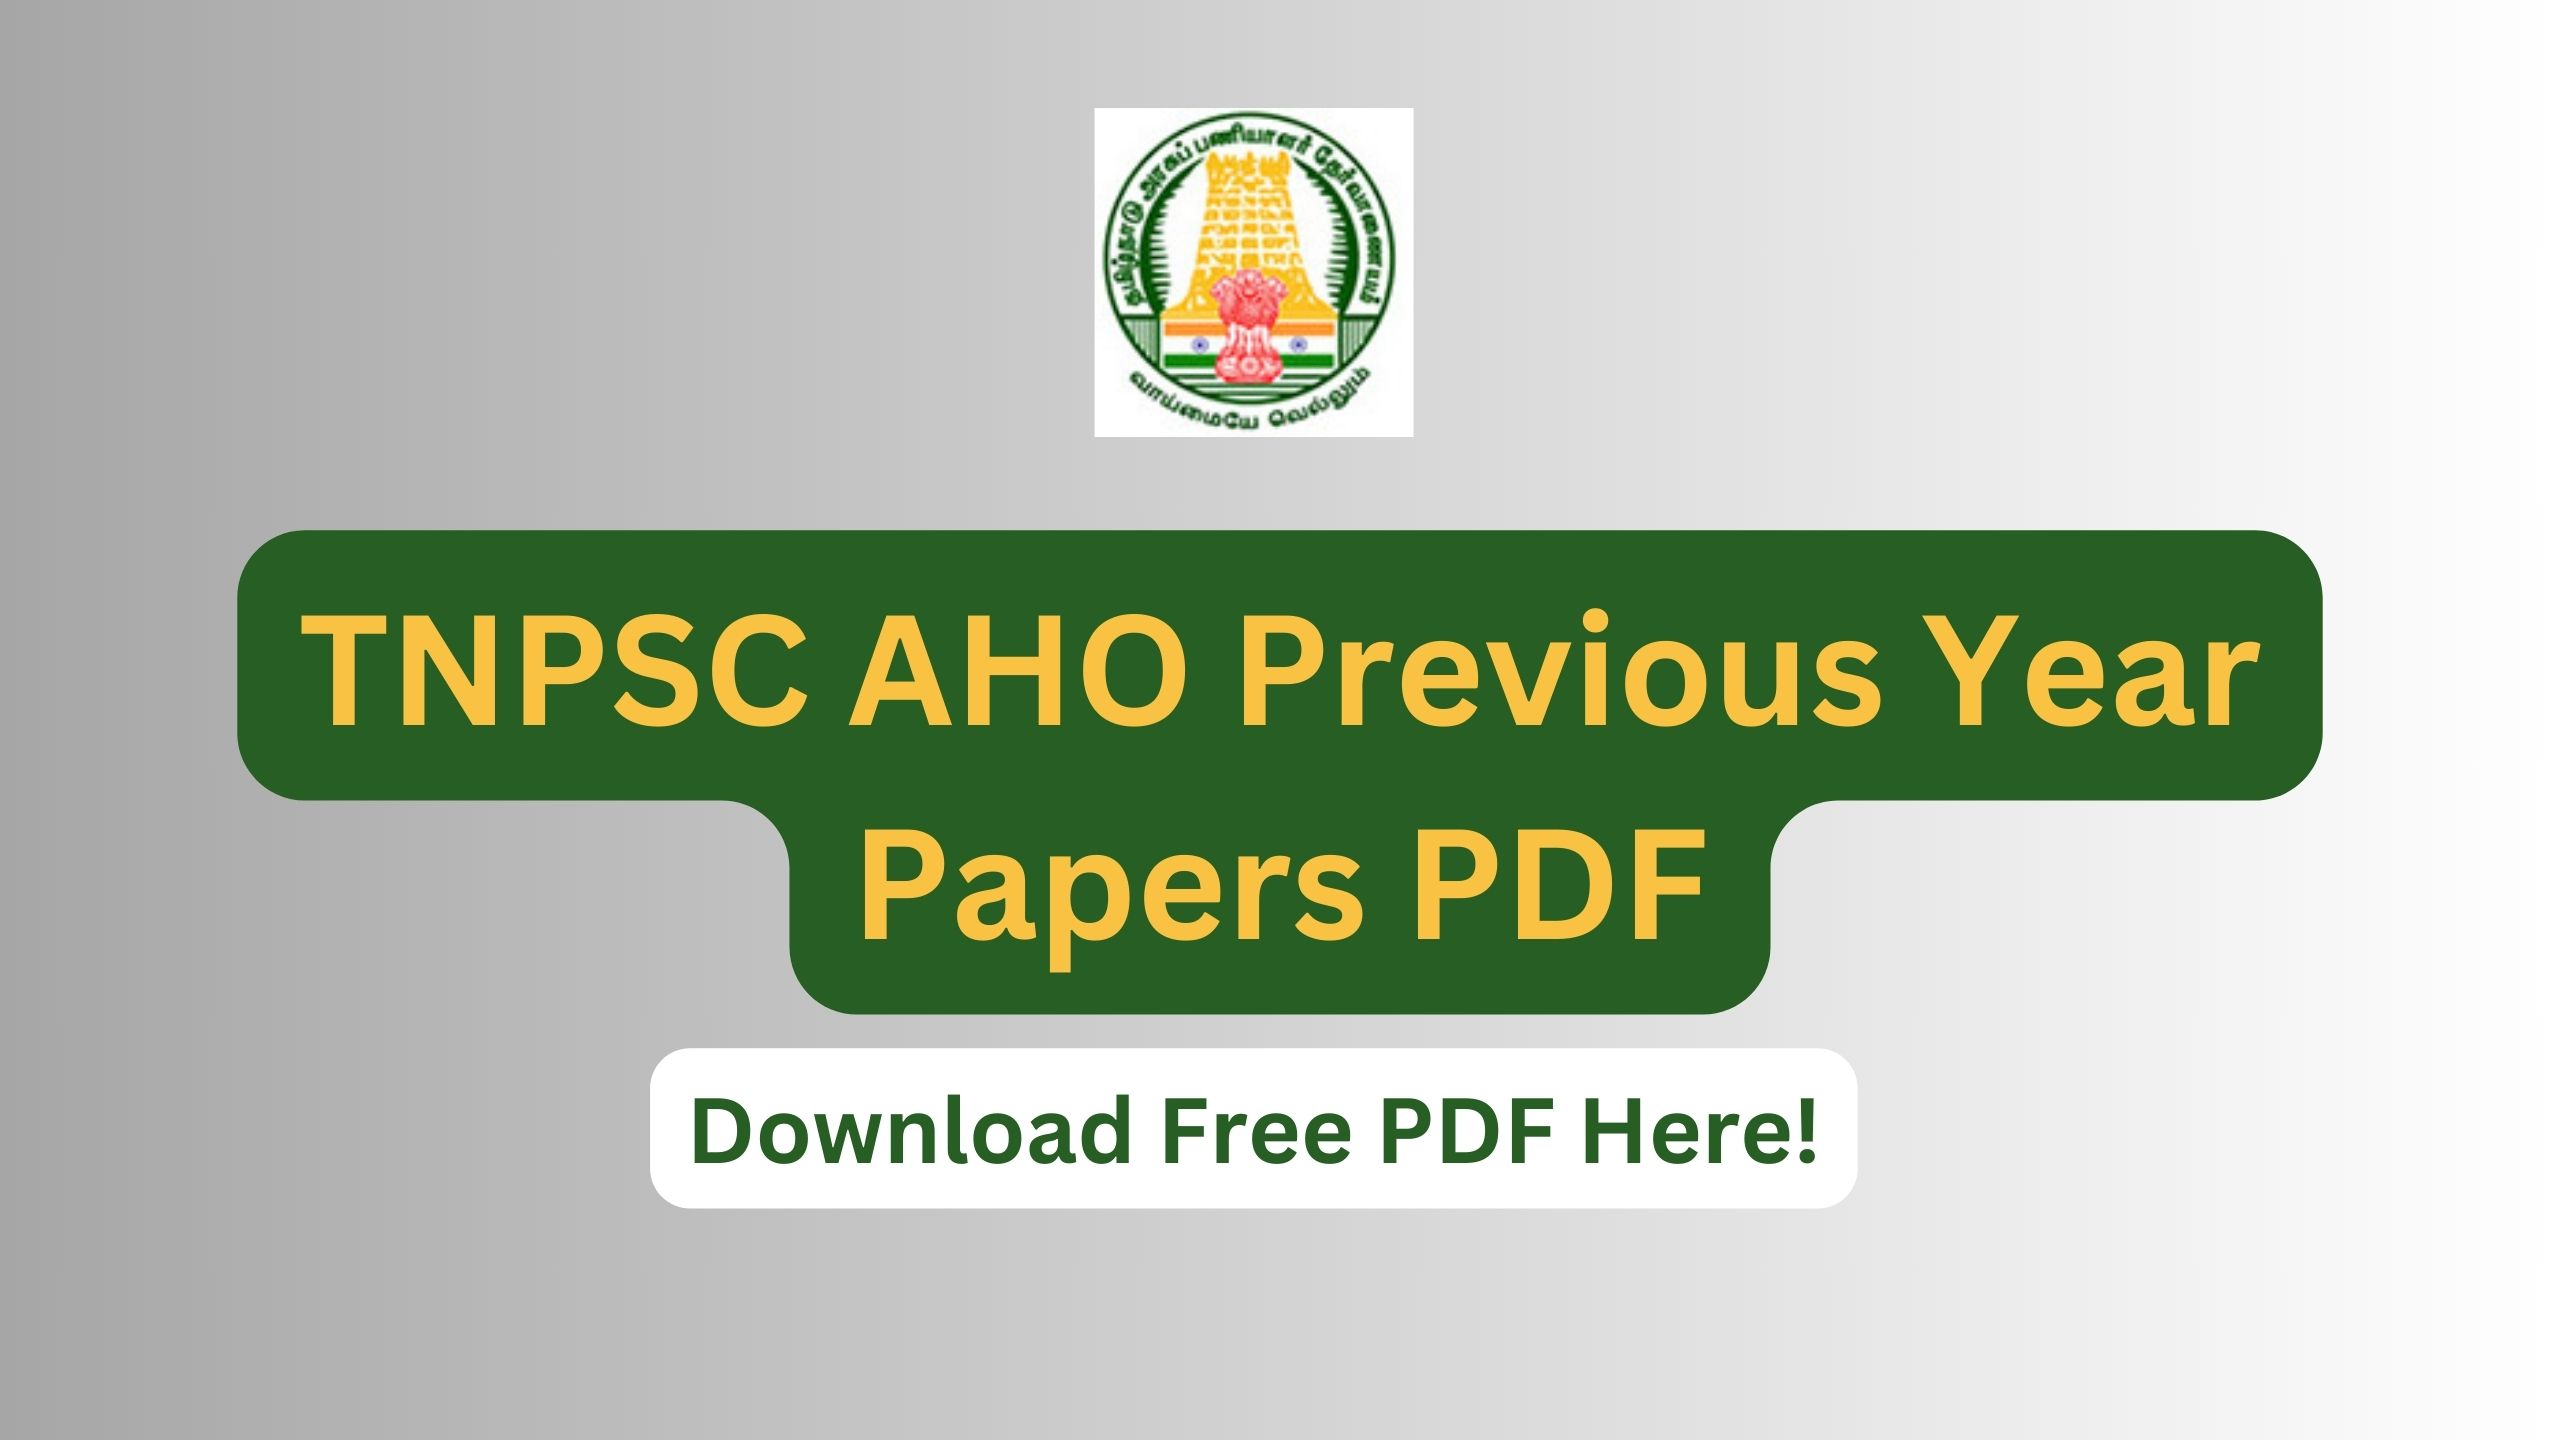 TNPSC AHO Previous Year Papers, Download Free PDF Here!